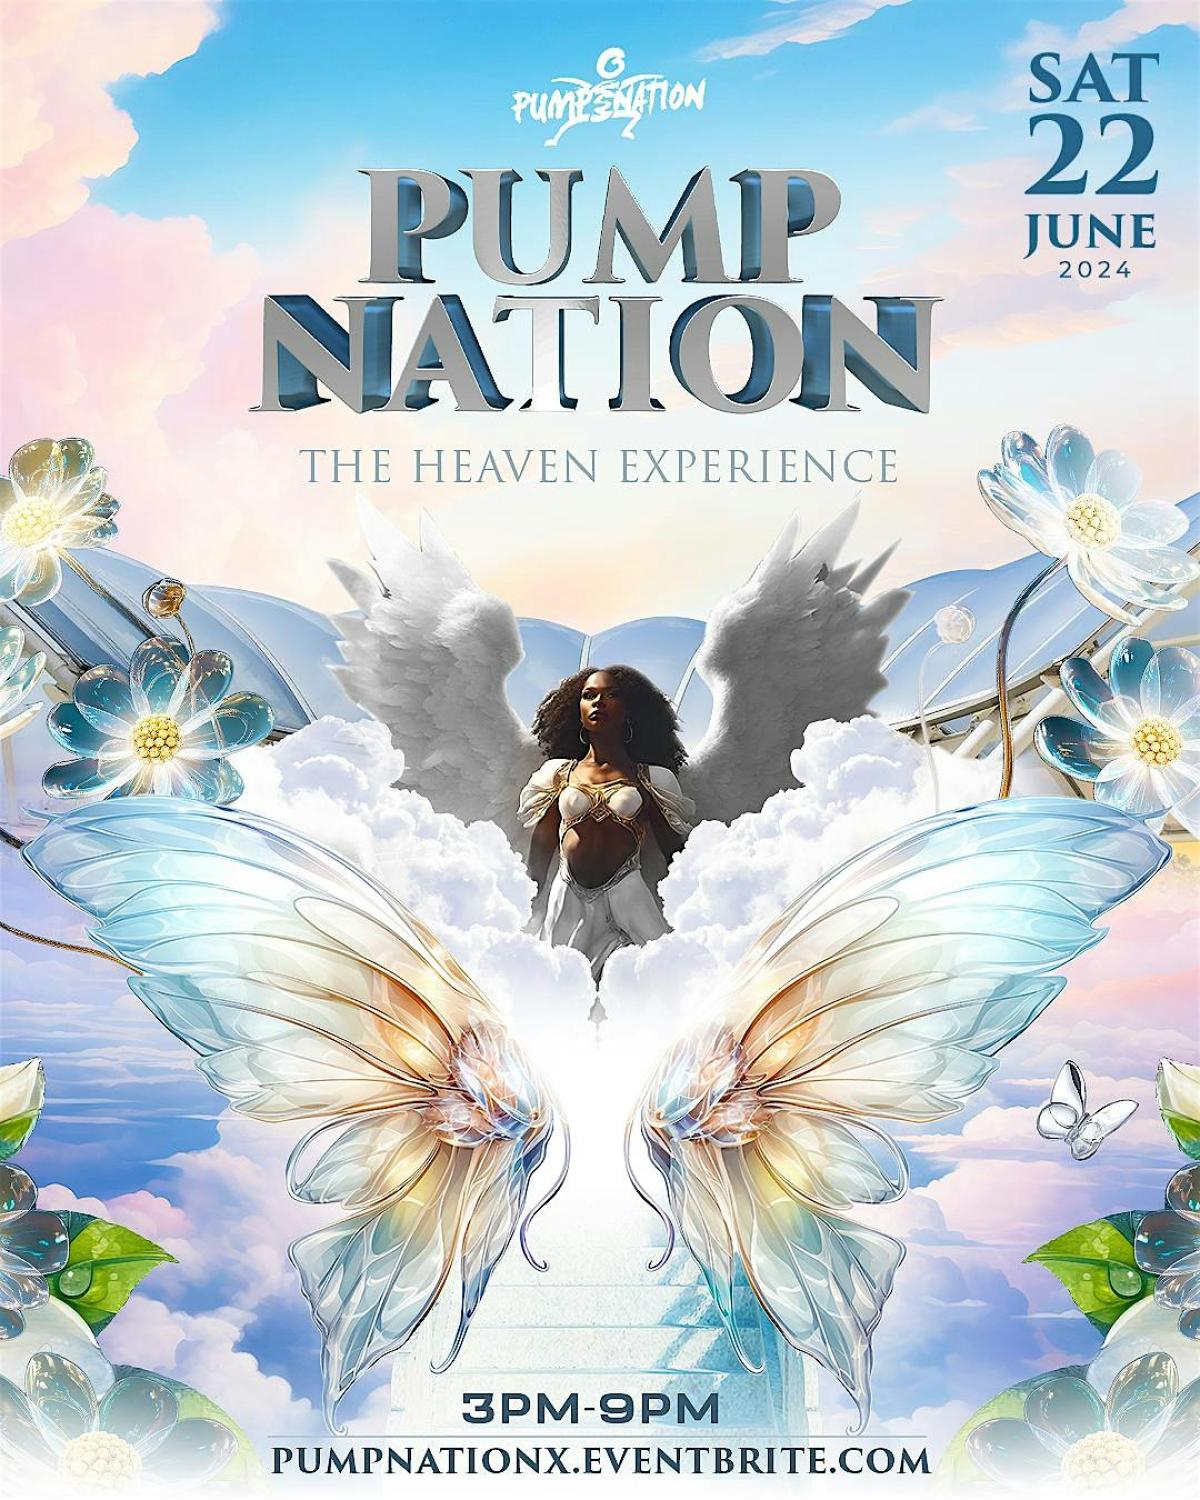 Pump Nation flyer or graphic.